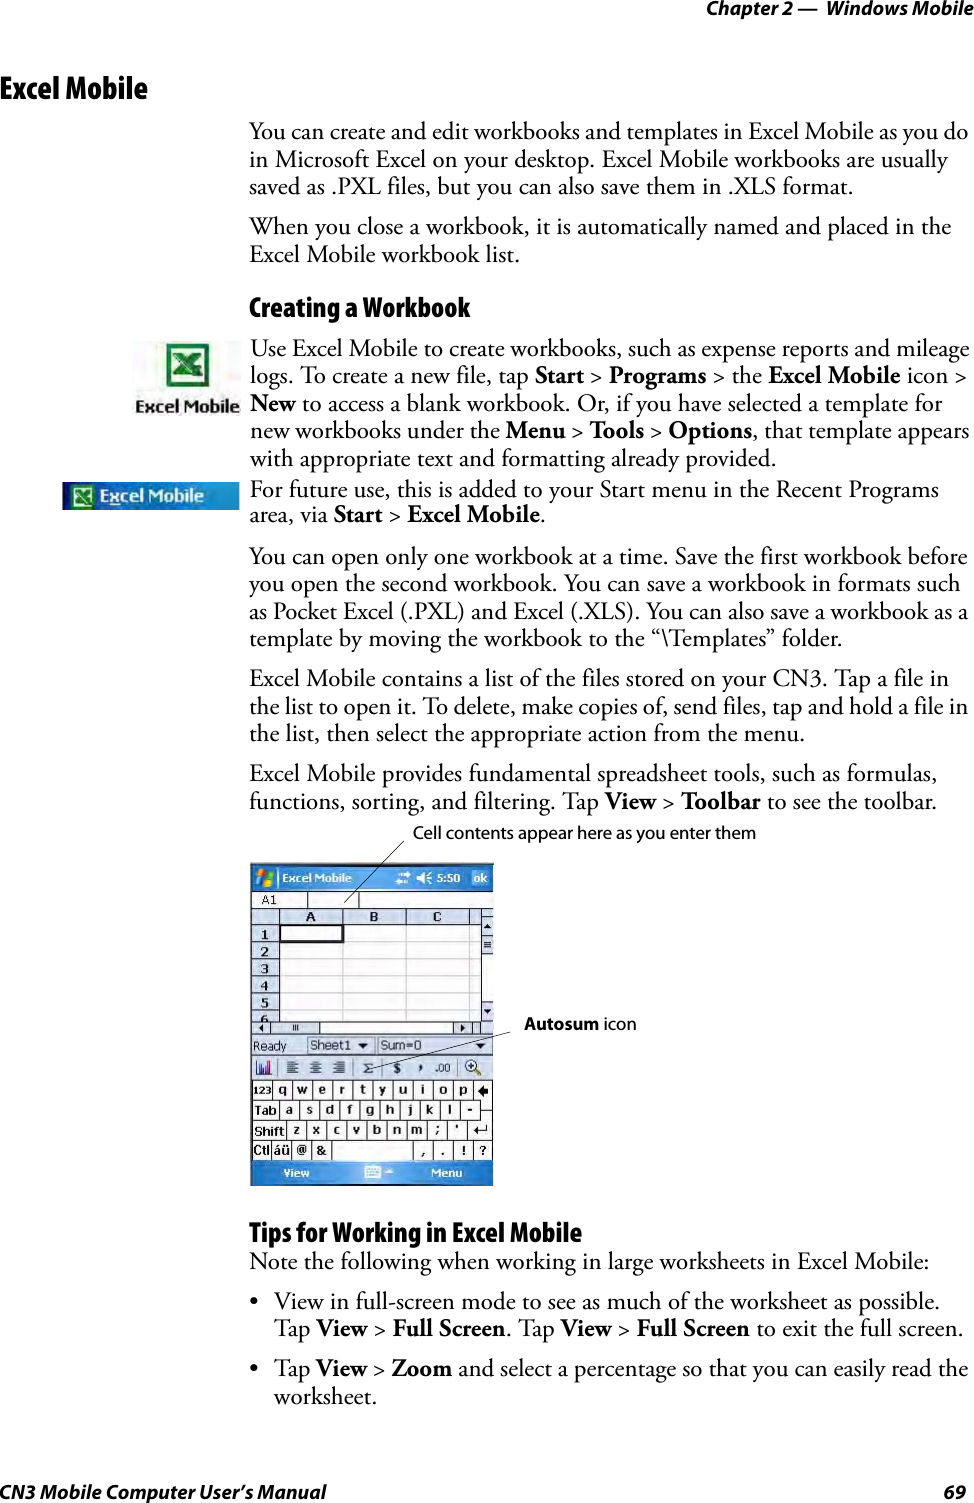 Chapter 2 —  Windows MobileCN3 Mobile Computer User’s Manual 69Excel MobileYou can create and edit workbooks and templates in Excel Mobile as you do in Microsoft Excel on your desktop. Excel Mobile workbooks are usually saved as .PXL files, but you can also save them in .XLS format.When you close a workbook, it is automatically named and placed in the Excel Mobile workbook list.Creating a WorkbookYou can open only one workbook at a time. Save the first workbook before you open the second workbook. You can save a workbook in formats such as Pocket Excel (.PXL) and Excel (.XLS). You can also save a workbook as a template by moving the workbook to the “\Templates” folder.Excel Mobile contains a list of the files stored on your CN3. Tap a file in the list to open it. To delete, make copies of, send files, tap and hold a file in the list, then select the appropriate action from the menu.Excel Mobile provides fundamental spreadsheet tools, such as formulas, functions, sorting, and filtering. Tap View &gt; Toolbar to see the toolbar.Tips for Working in Excel MobileNote the following when working in large worksheets in Excel Mobile:• View in full-screen mode to see as much of the worksheet as possible. Tap  View &gt; Full Screen. Tap View &gt; Full Screen to exit the full screen.•Tap View &gt; Zoom and select a percentage so that you can easily read the worksheet.Use Excel Mobile to create workbooks, such as expense reports and mileage logs. To create a new file, tap Start &gt; Programs &gt; the Excel Mobile icon &gt; New to access a blank workbook. Or, if you have selected a template for new workbooks under the Menu &gt; Tools &gt; Options, that template appears with appropriate text and formatting already provided.For future use, this is added to your Start menu in the Recent Programs area, via Start &gt; Excel Mobile. Cell contents appear here as you enter themAutosum icon